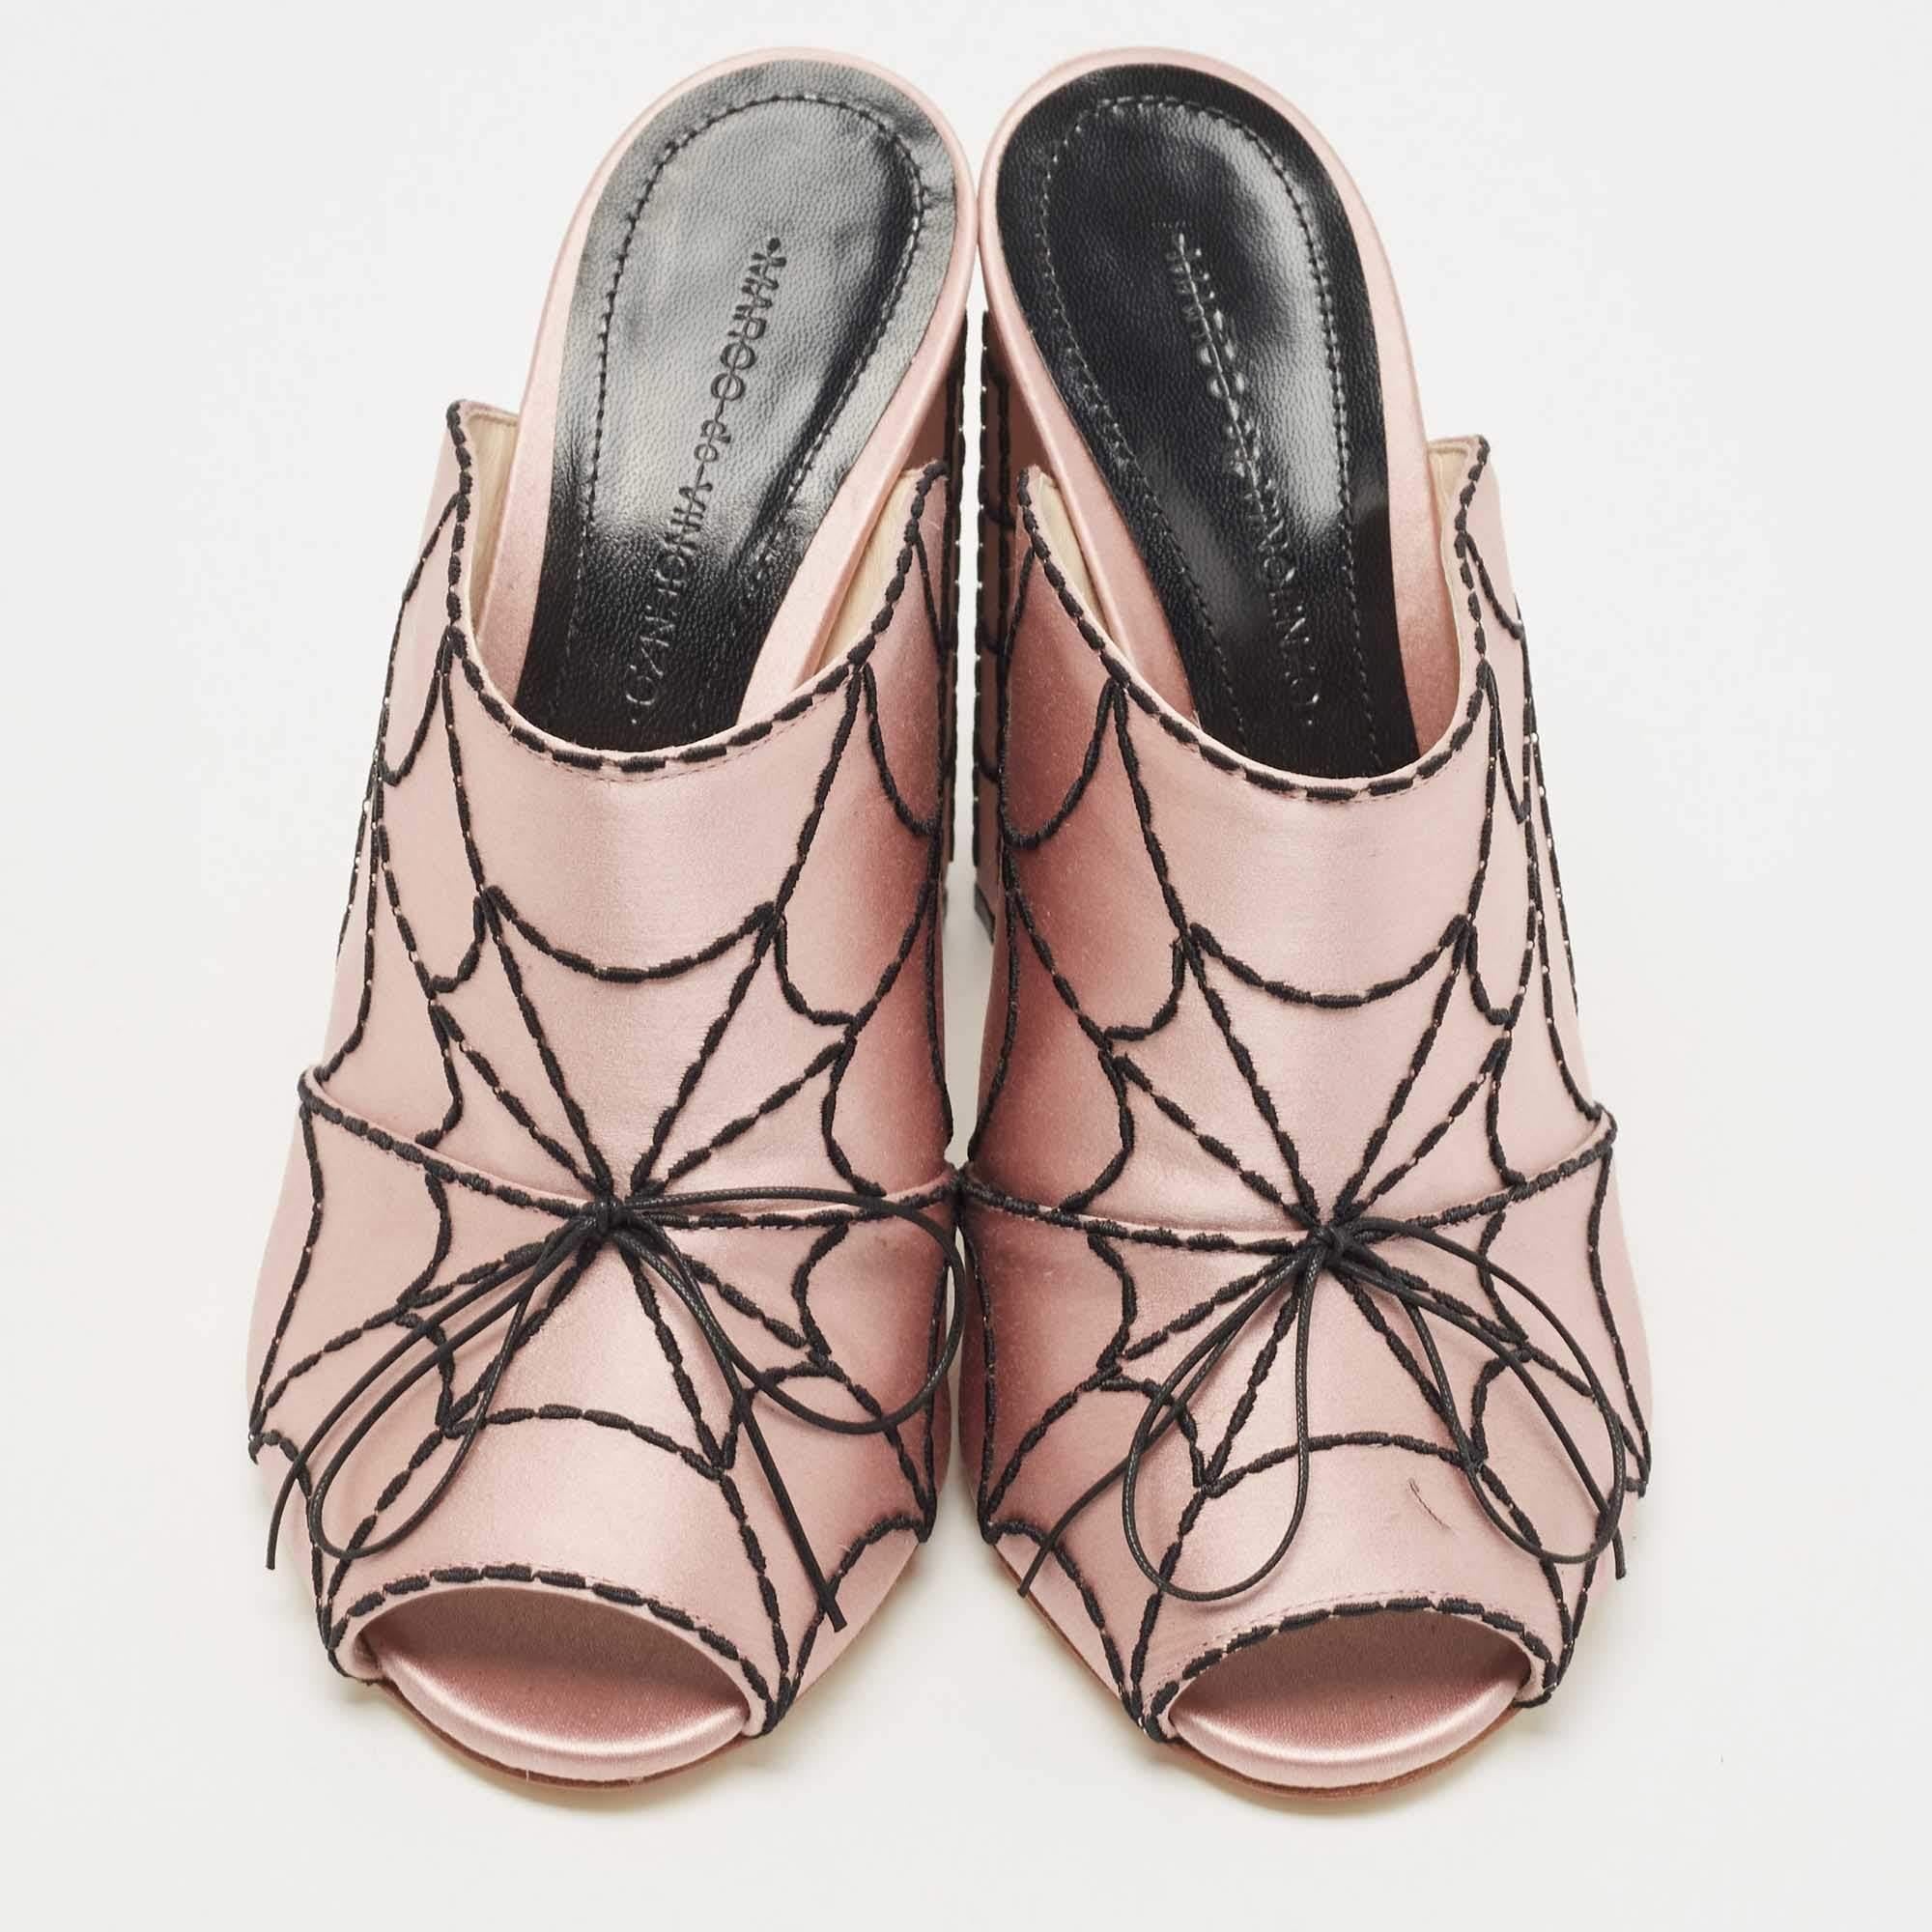 The Marco de Vincenzo mules are a luxurious and eye-catching footwear choice. Crafted from smooth pink satin, these mules feature exquisite spider web embroidery, adding a touch of intrigue and elegance. With a comfortable slip-on design and a sleek